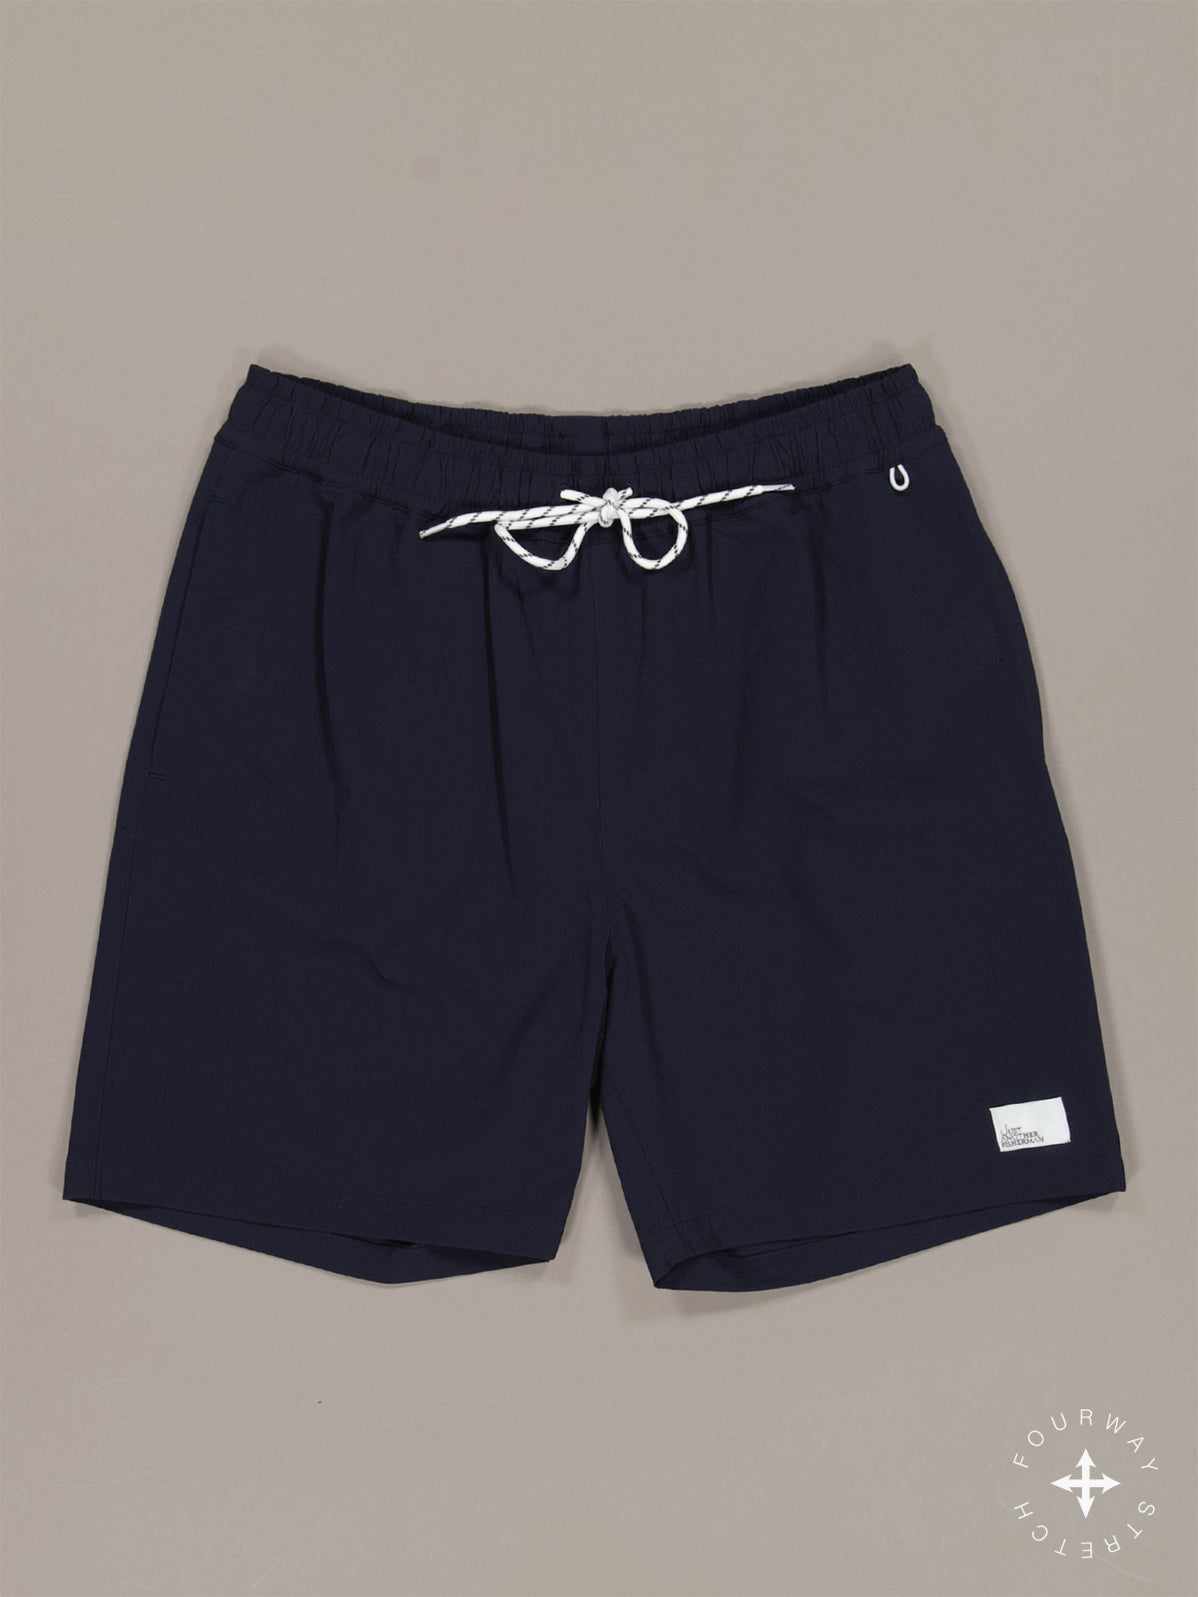 CREWMAN SHORTS - NAVY– Just Another Fisherman